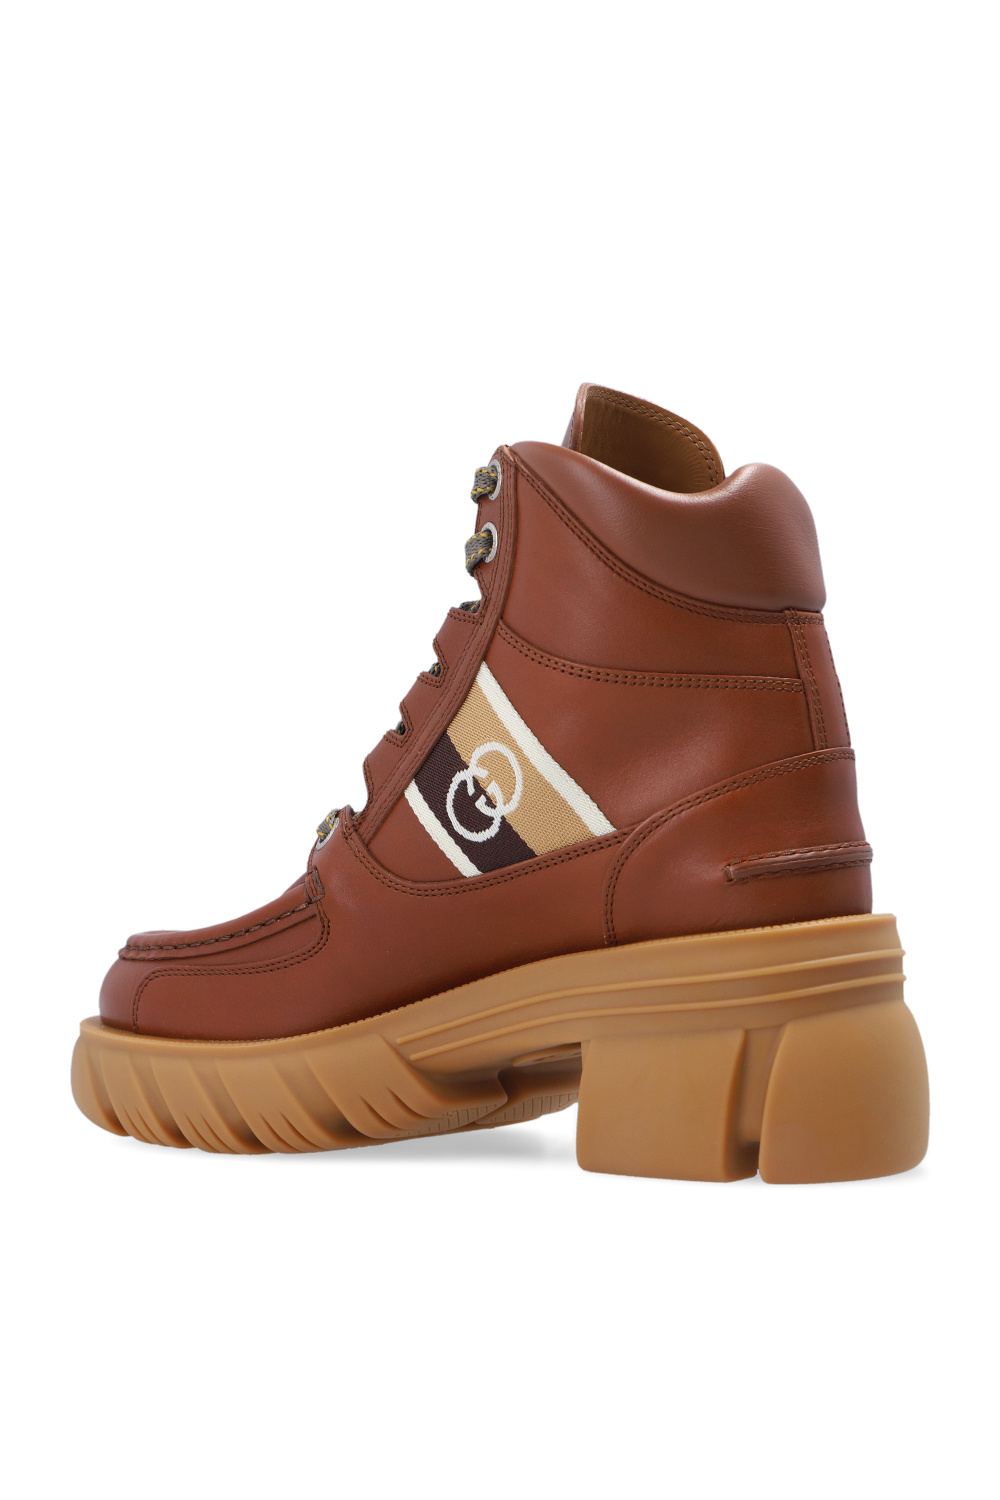 Gucci Ankle boots with logo